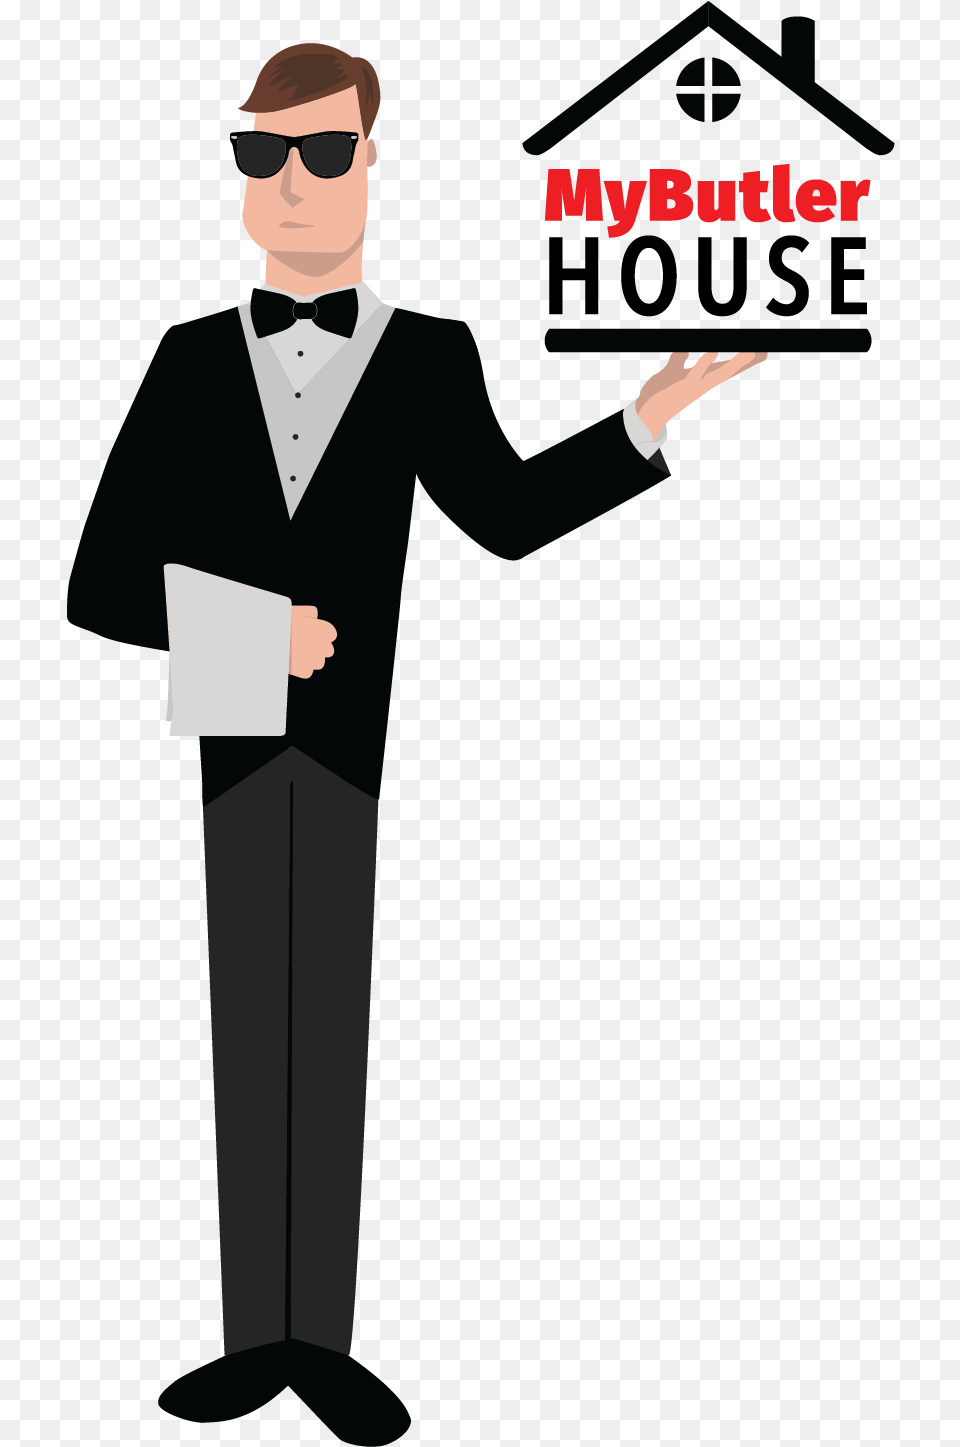 Mybutlerhouse 1 Tuxedo, Accessories, Sunglasses, Suit, Formal Wear Free Transparent Png